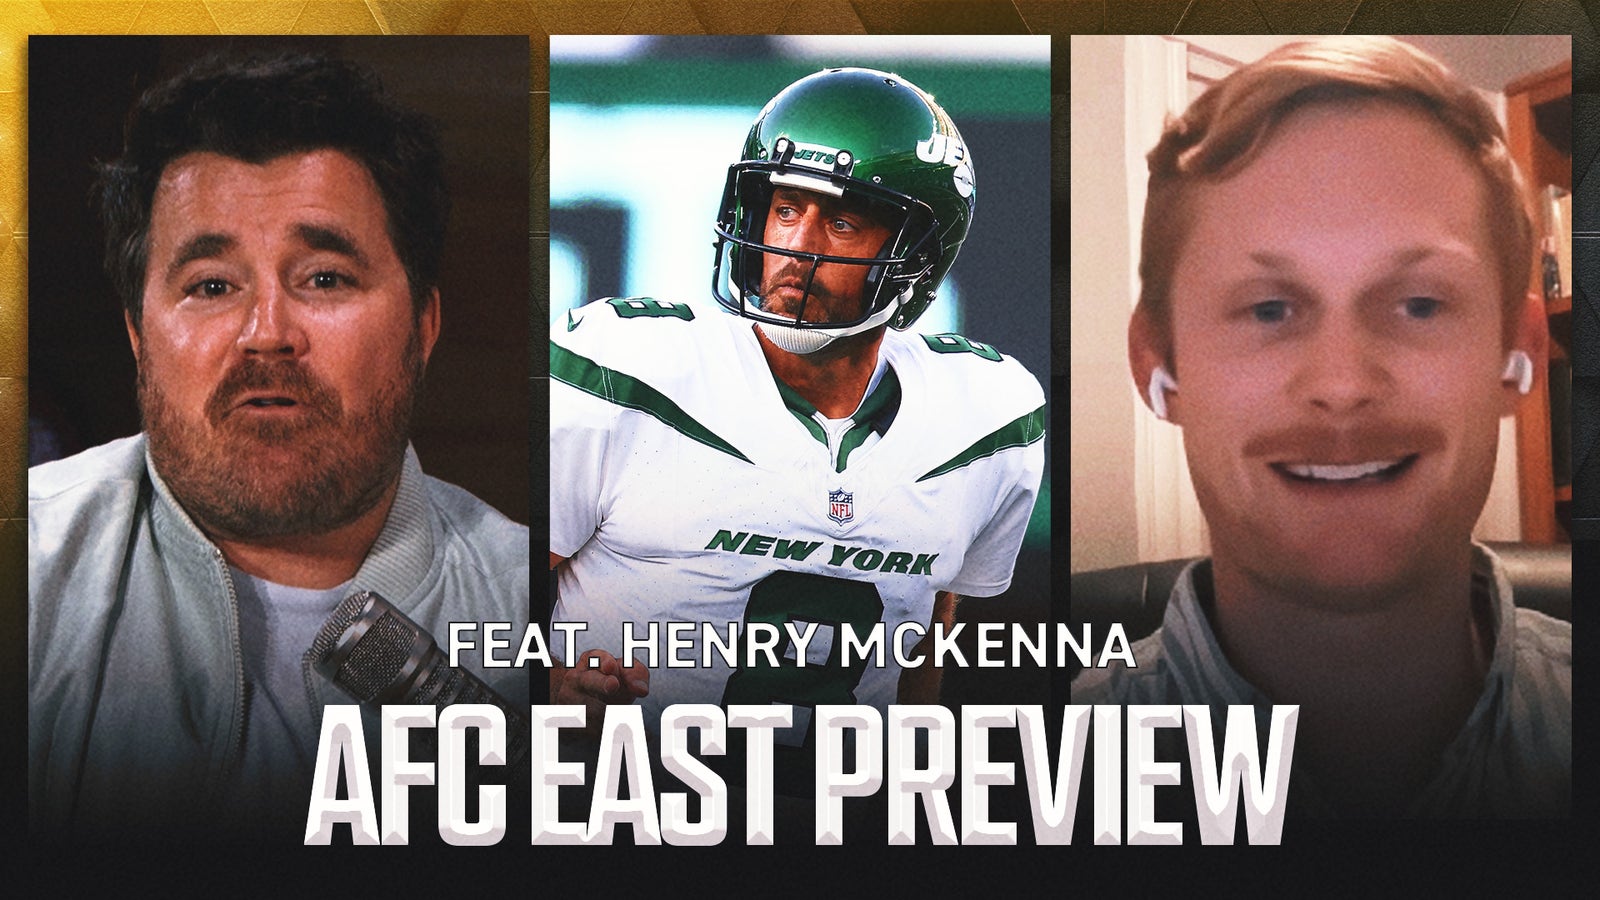 FOX Sports NFL writers Dave Helman and Henry McKenna break down the division. Can Mac Jones bounce back for the Patriots? Will Aaron Rodgers deliver for the Jets? Are the Bills the favorites? How will Tua Tagovailoa play for the Dolphins?